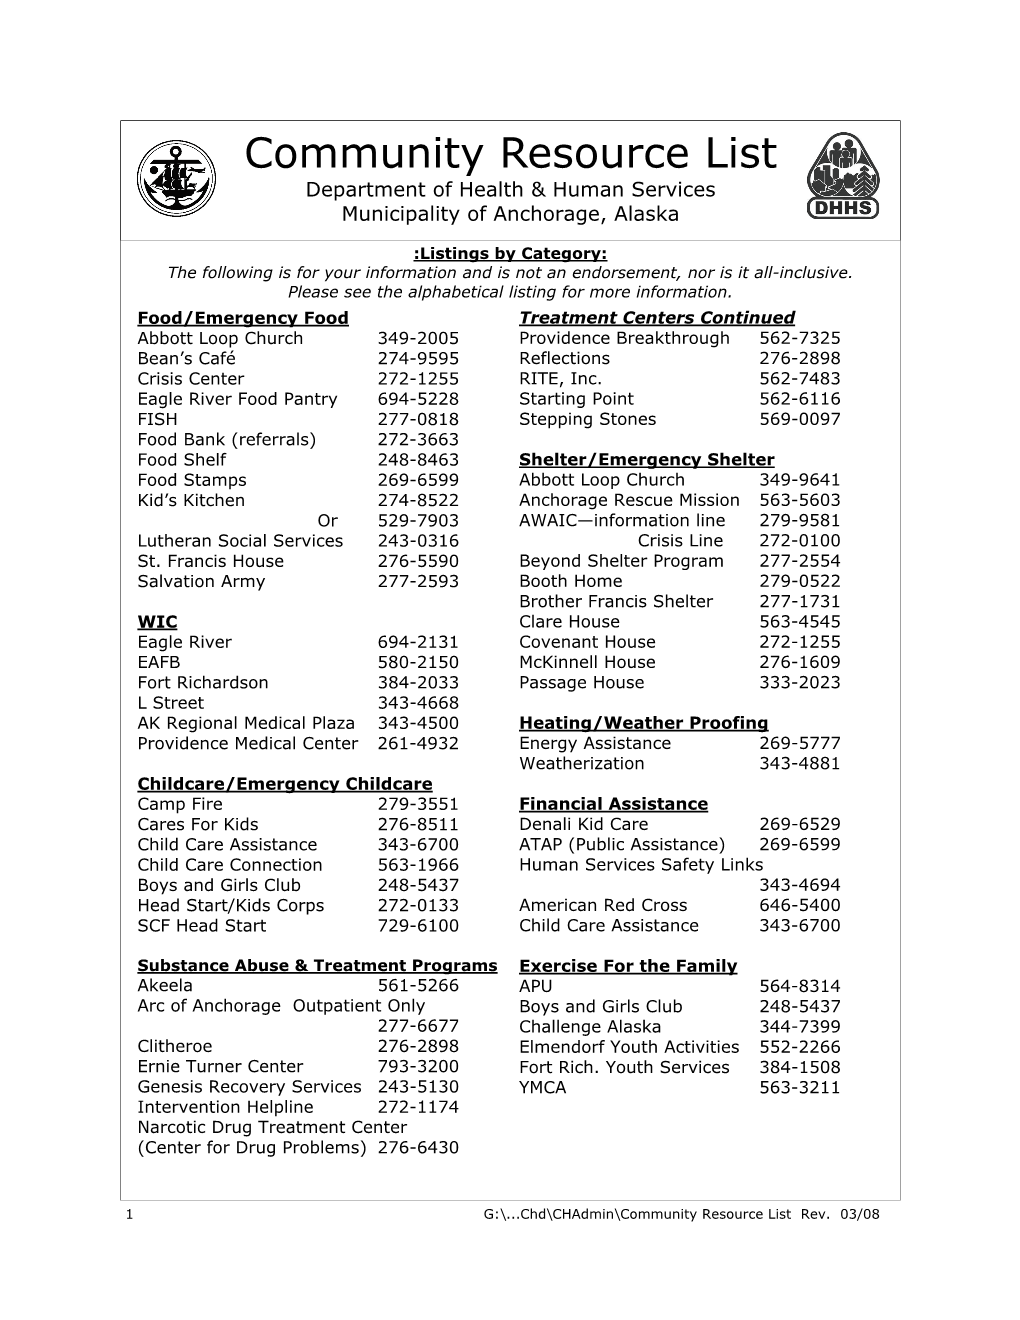 Community Resource List, Department of Health and Human Services